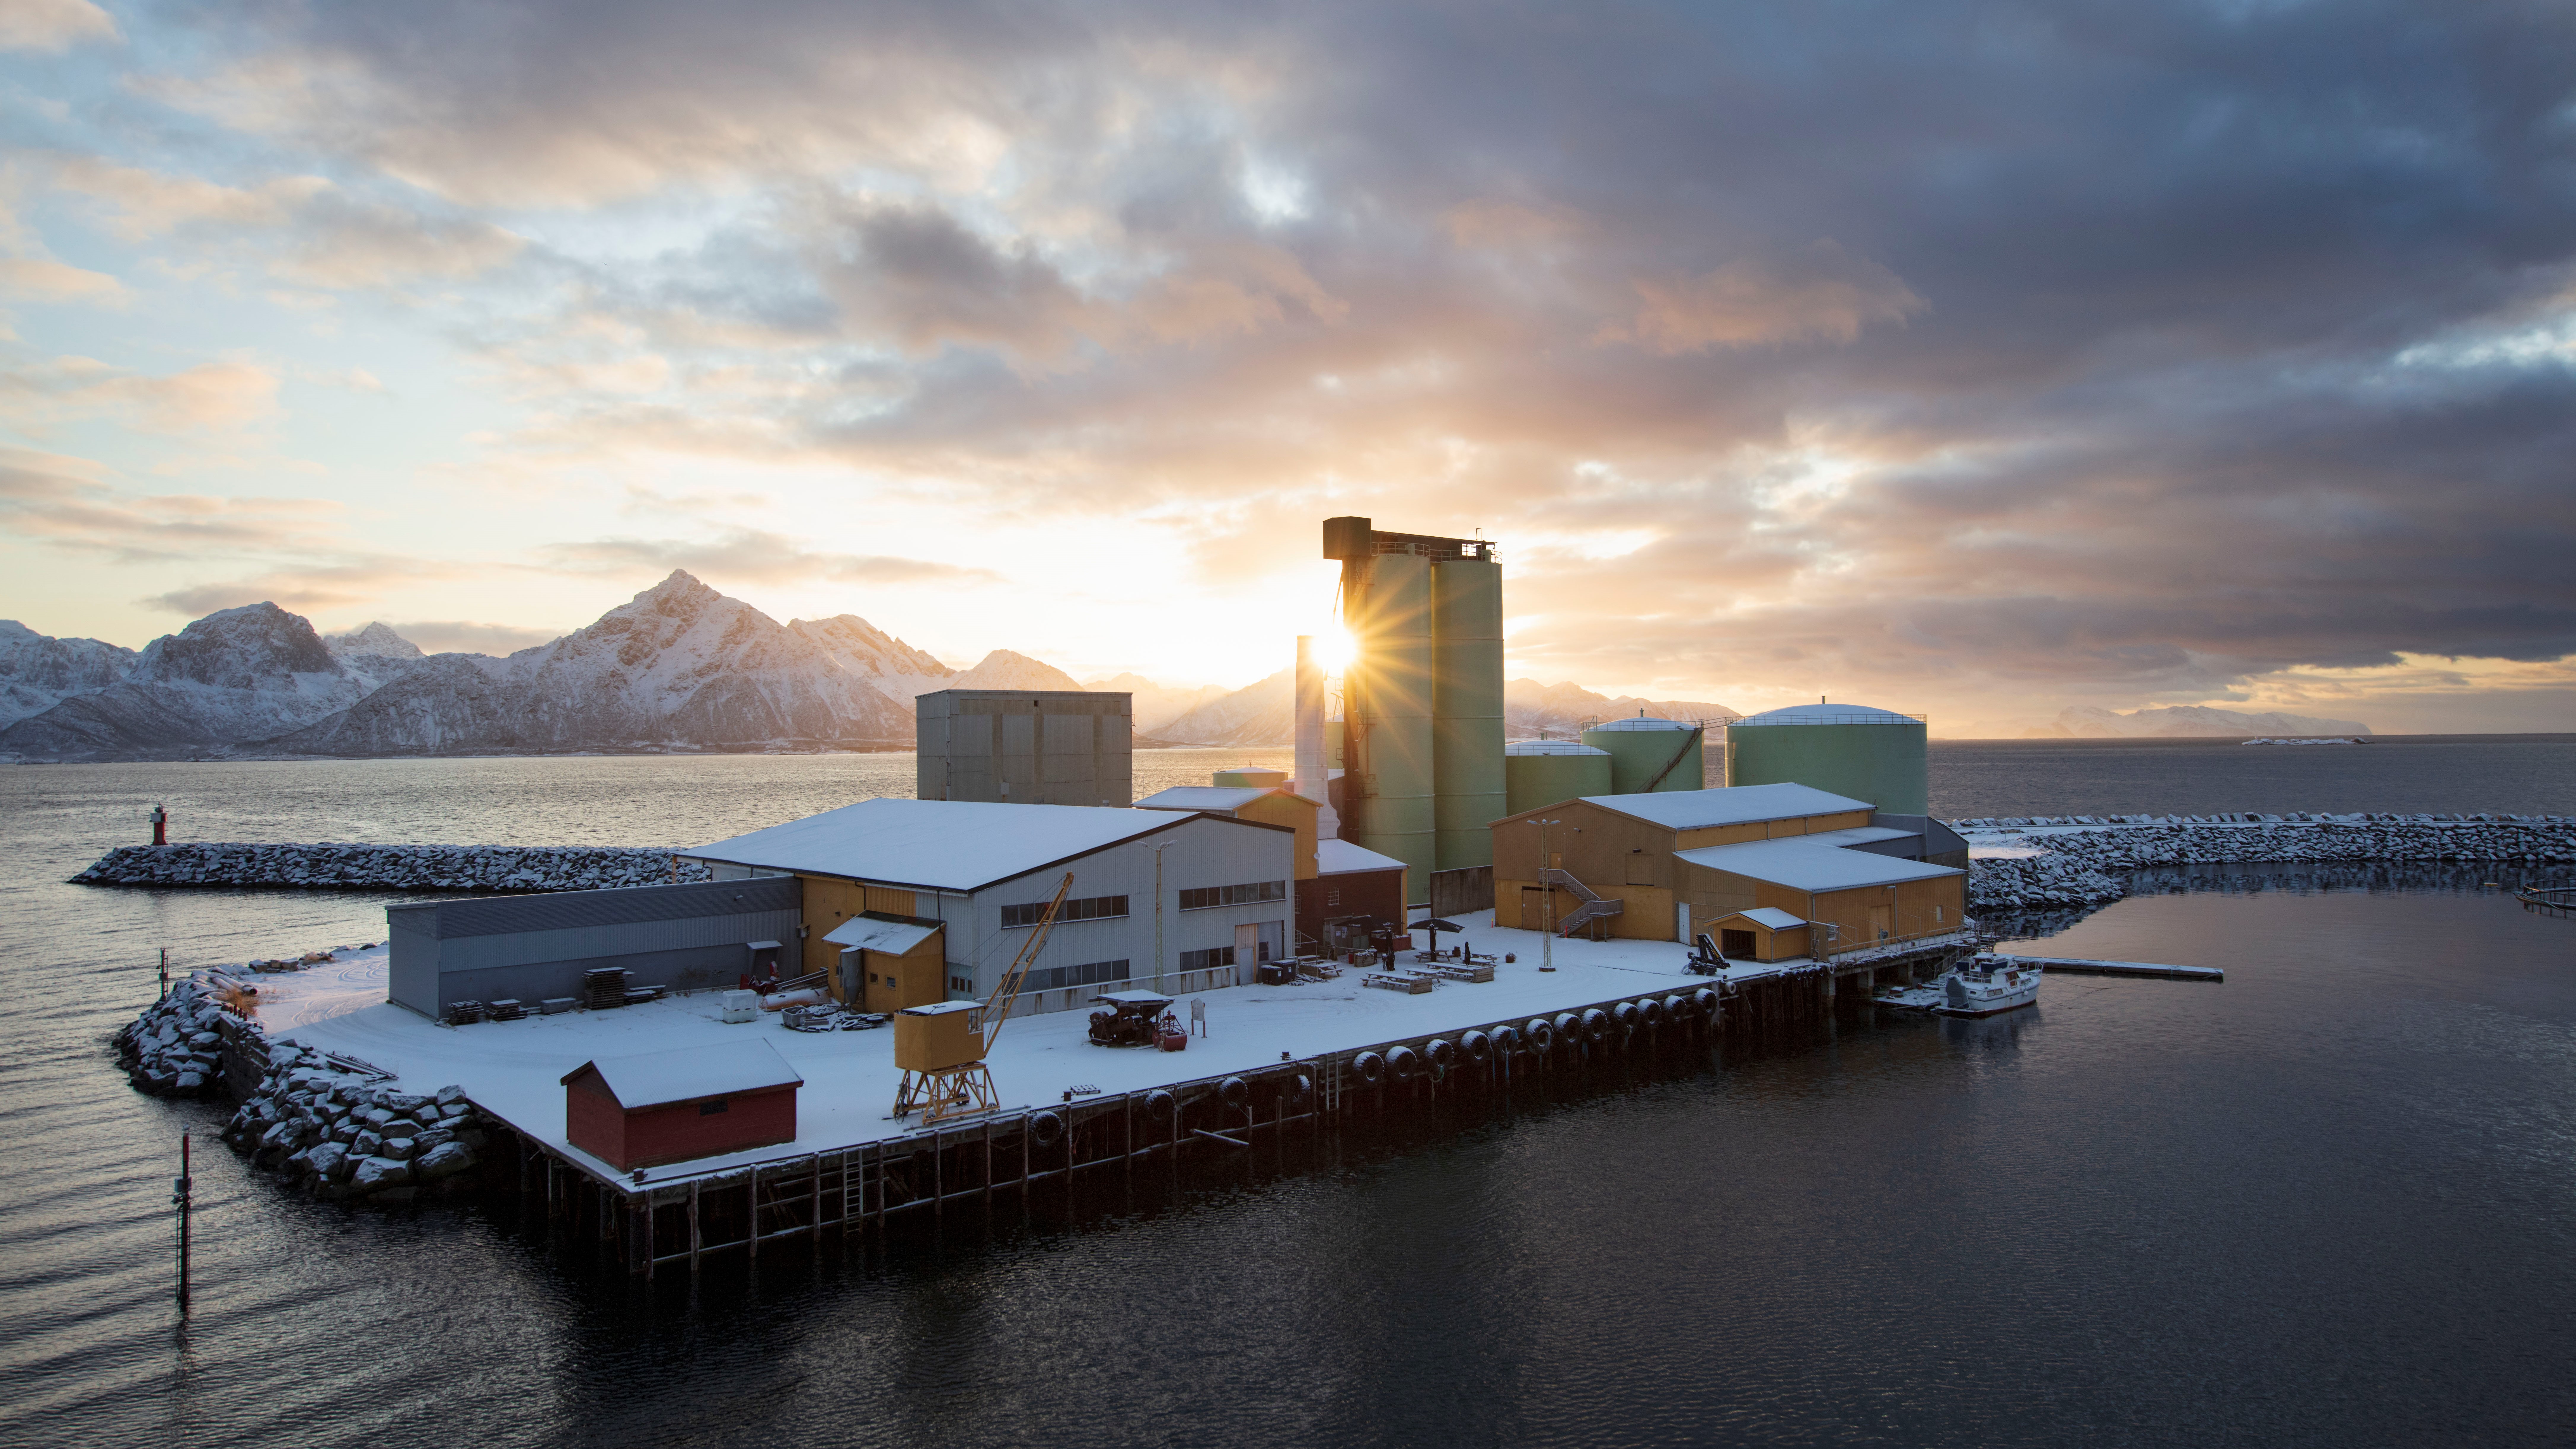 Neptune Herring Oil Factory was established in 1910 and is located on Svinøya in Hadsel Municipality, Nordland County. Photo: Trond A. Isaksen, Directorate for Cultural Heritage